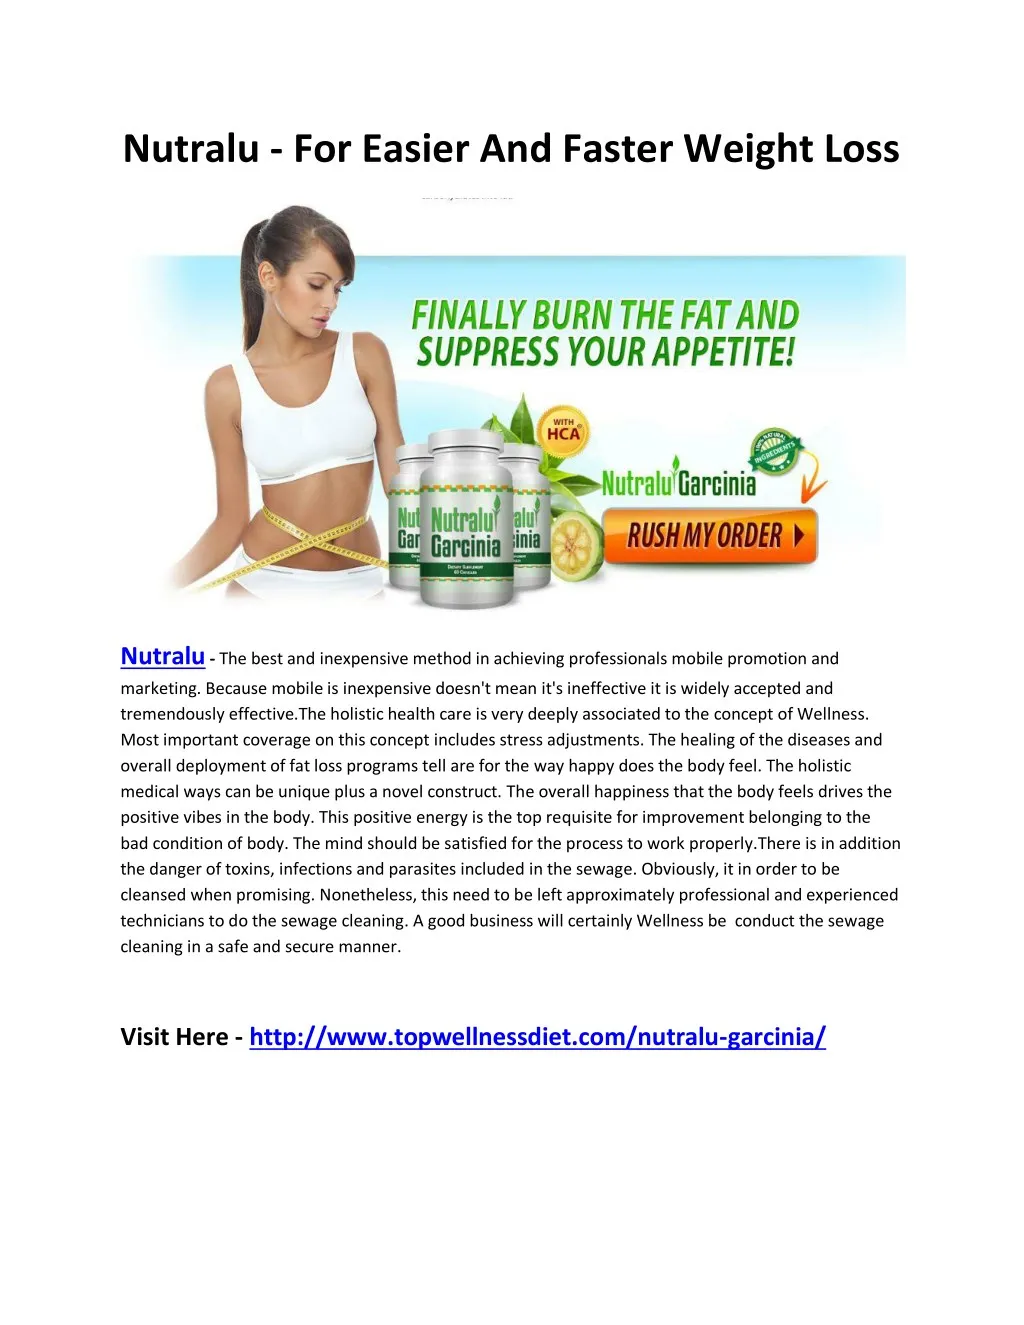 nutralu for easier and faster weight loss